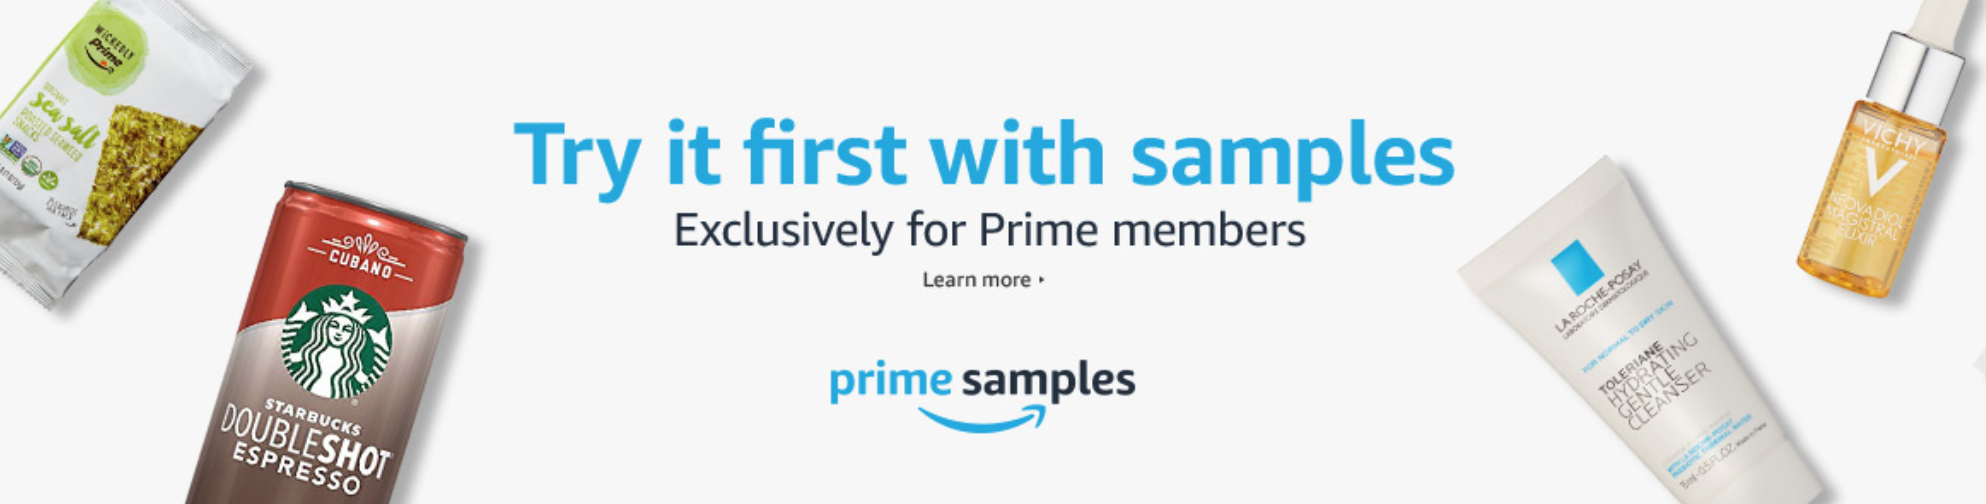 NEW Amazon Samples on Sale Starting From $2 -- Equivalent Credit After Purchase!